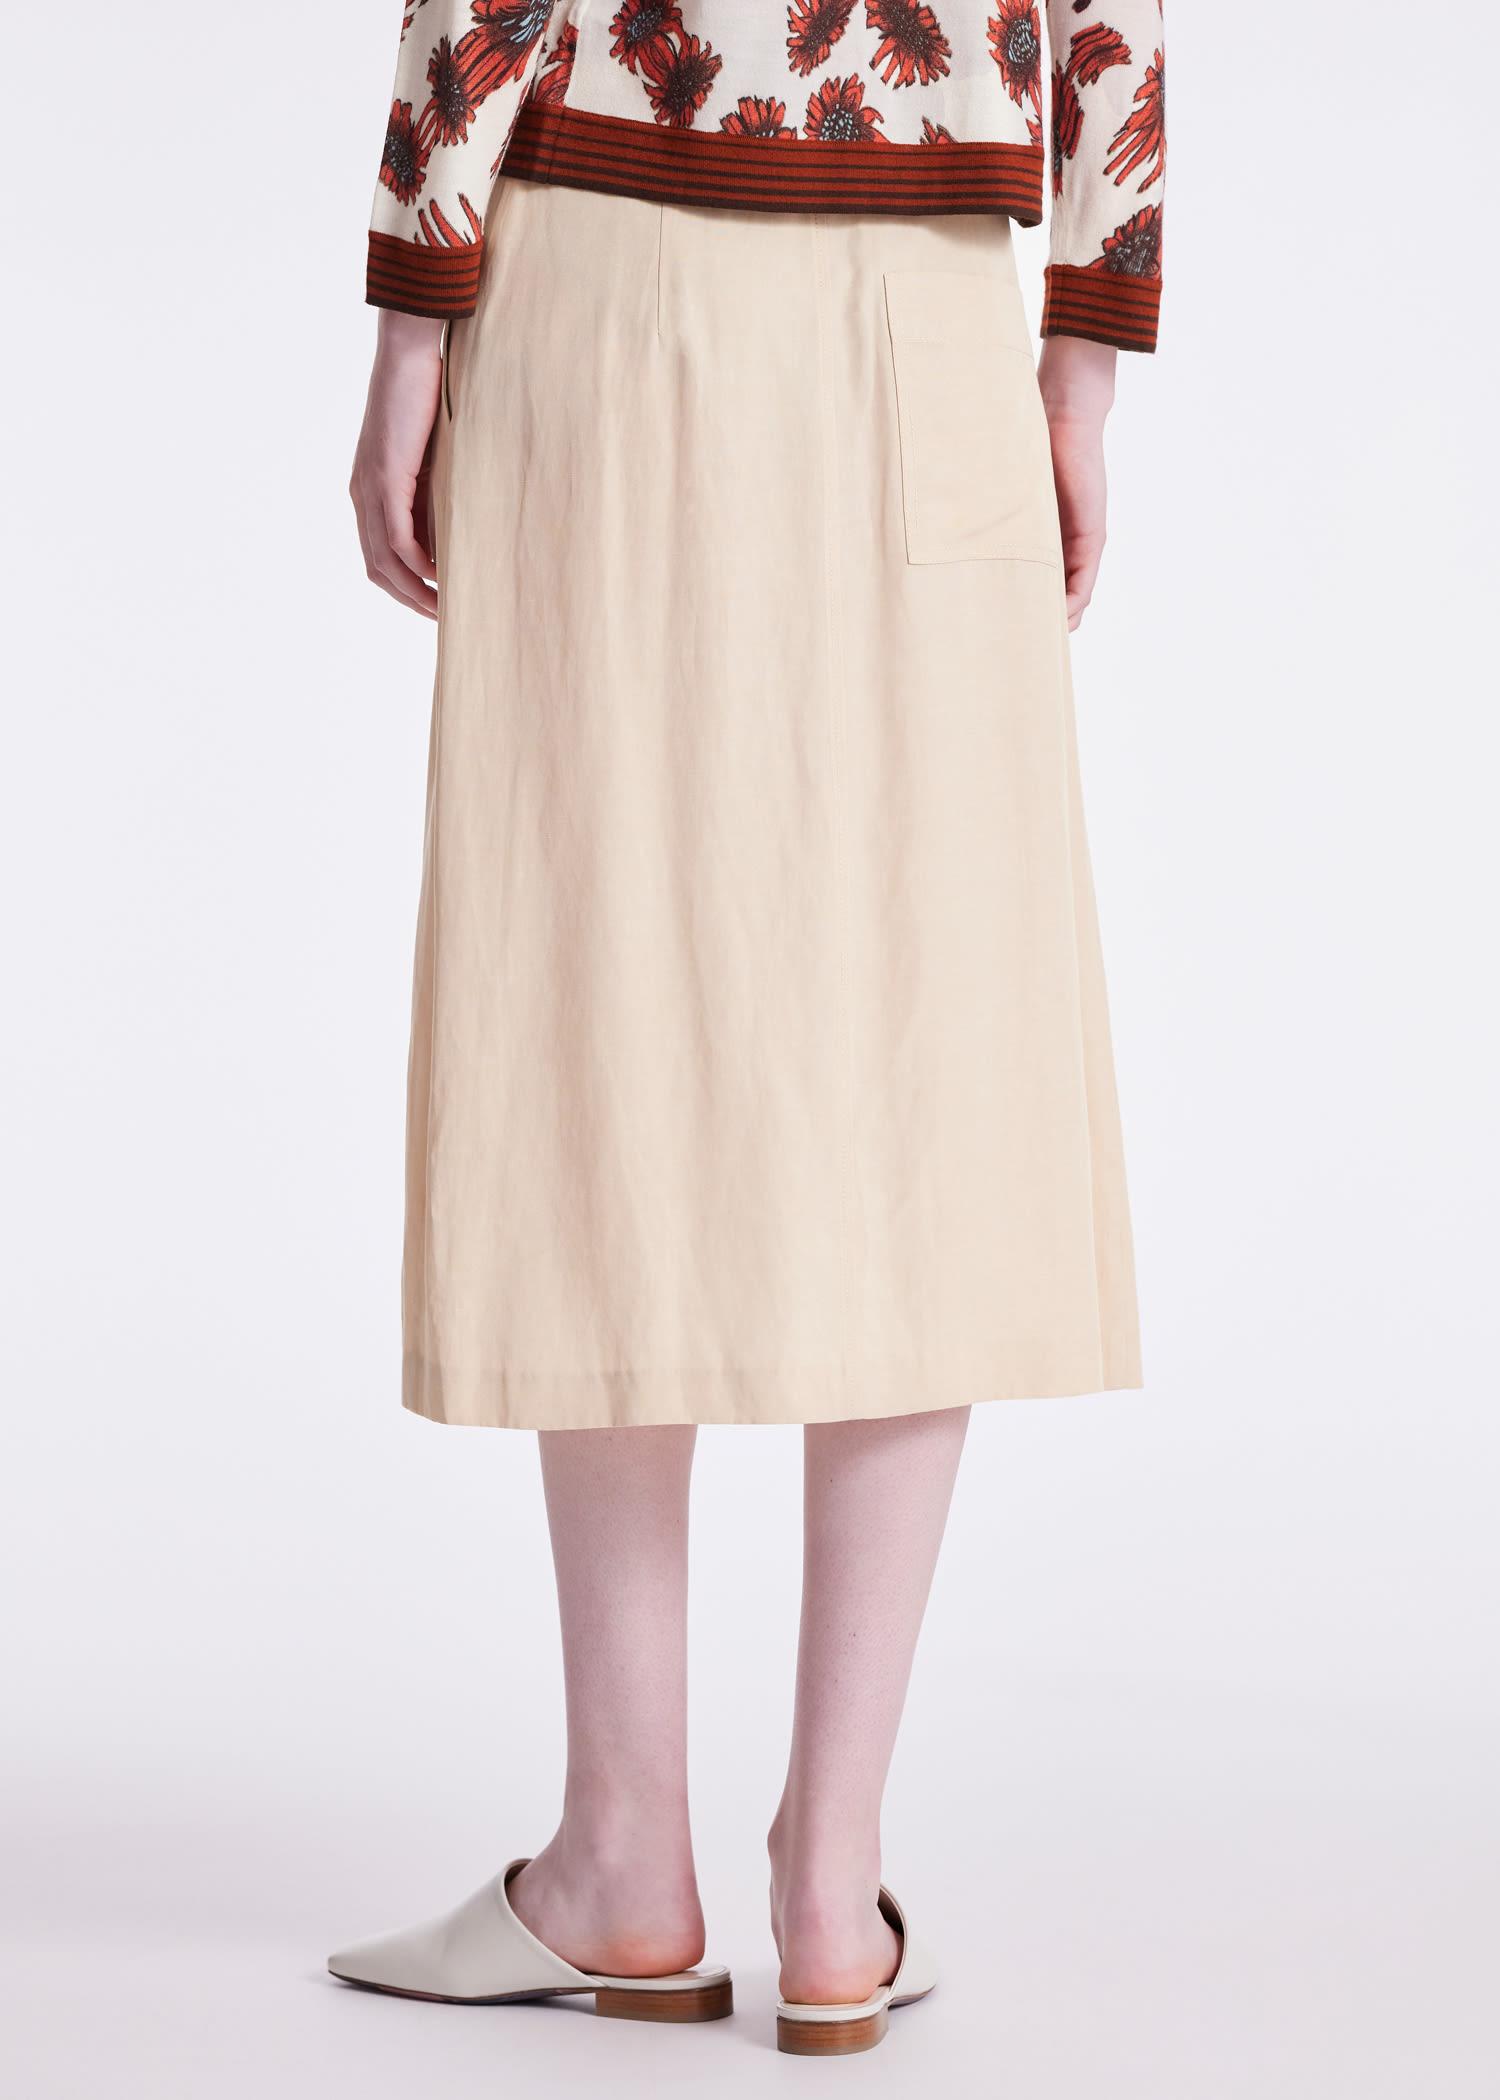 Paul Smith Cream Linen High Waisted Button Up Skirt in White | Lyst